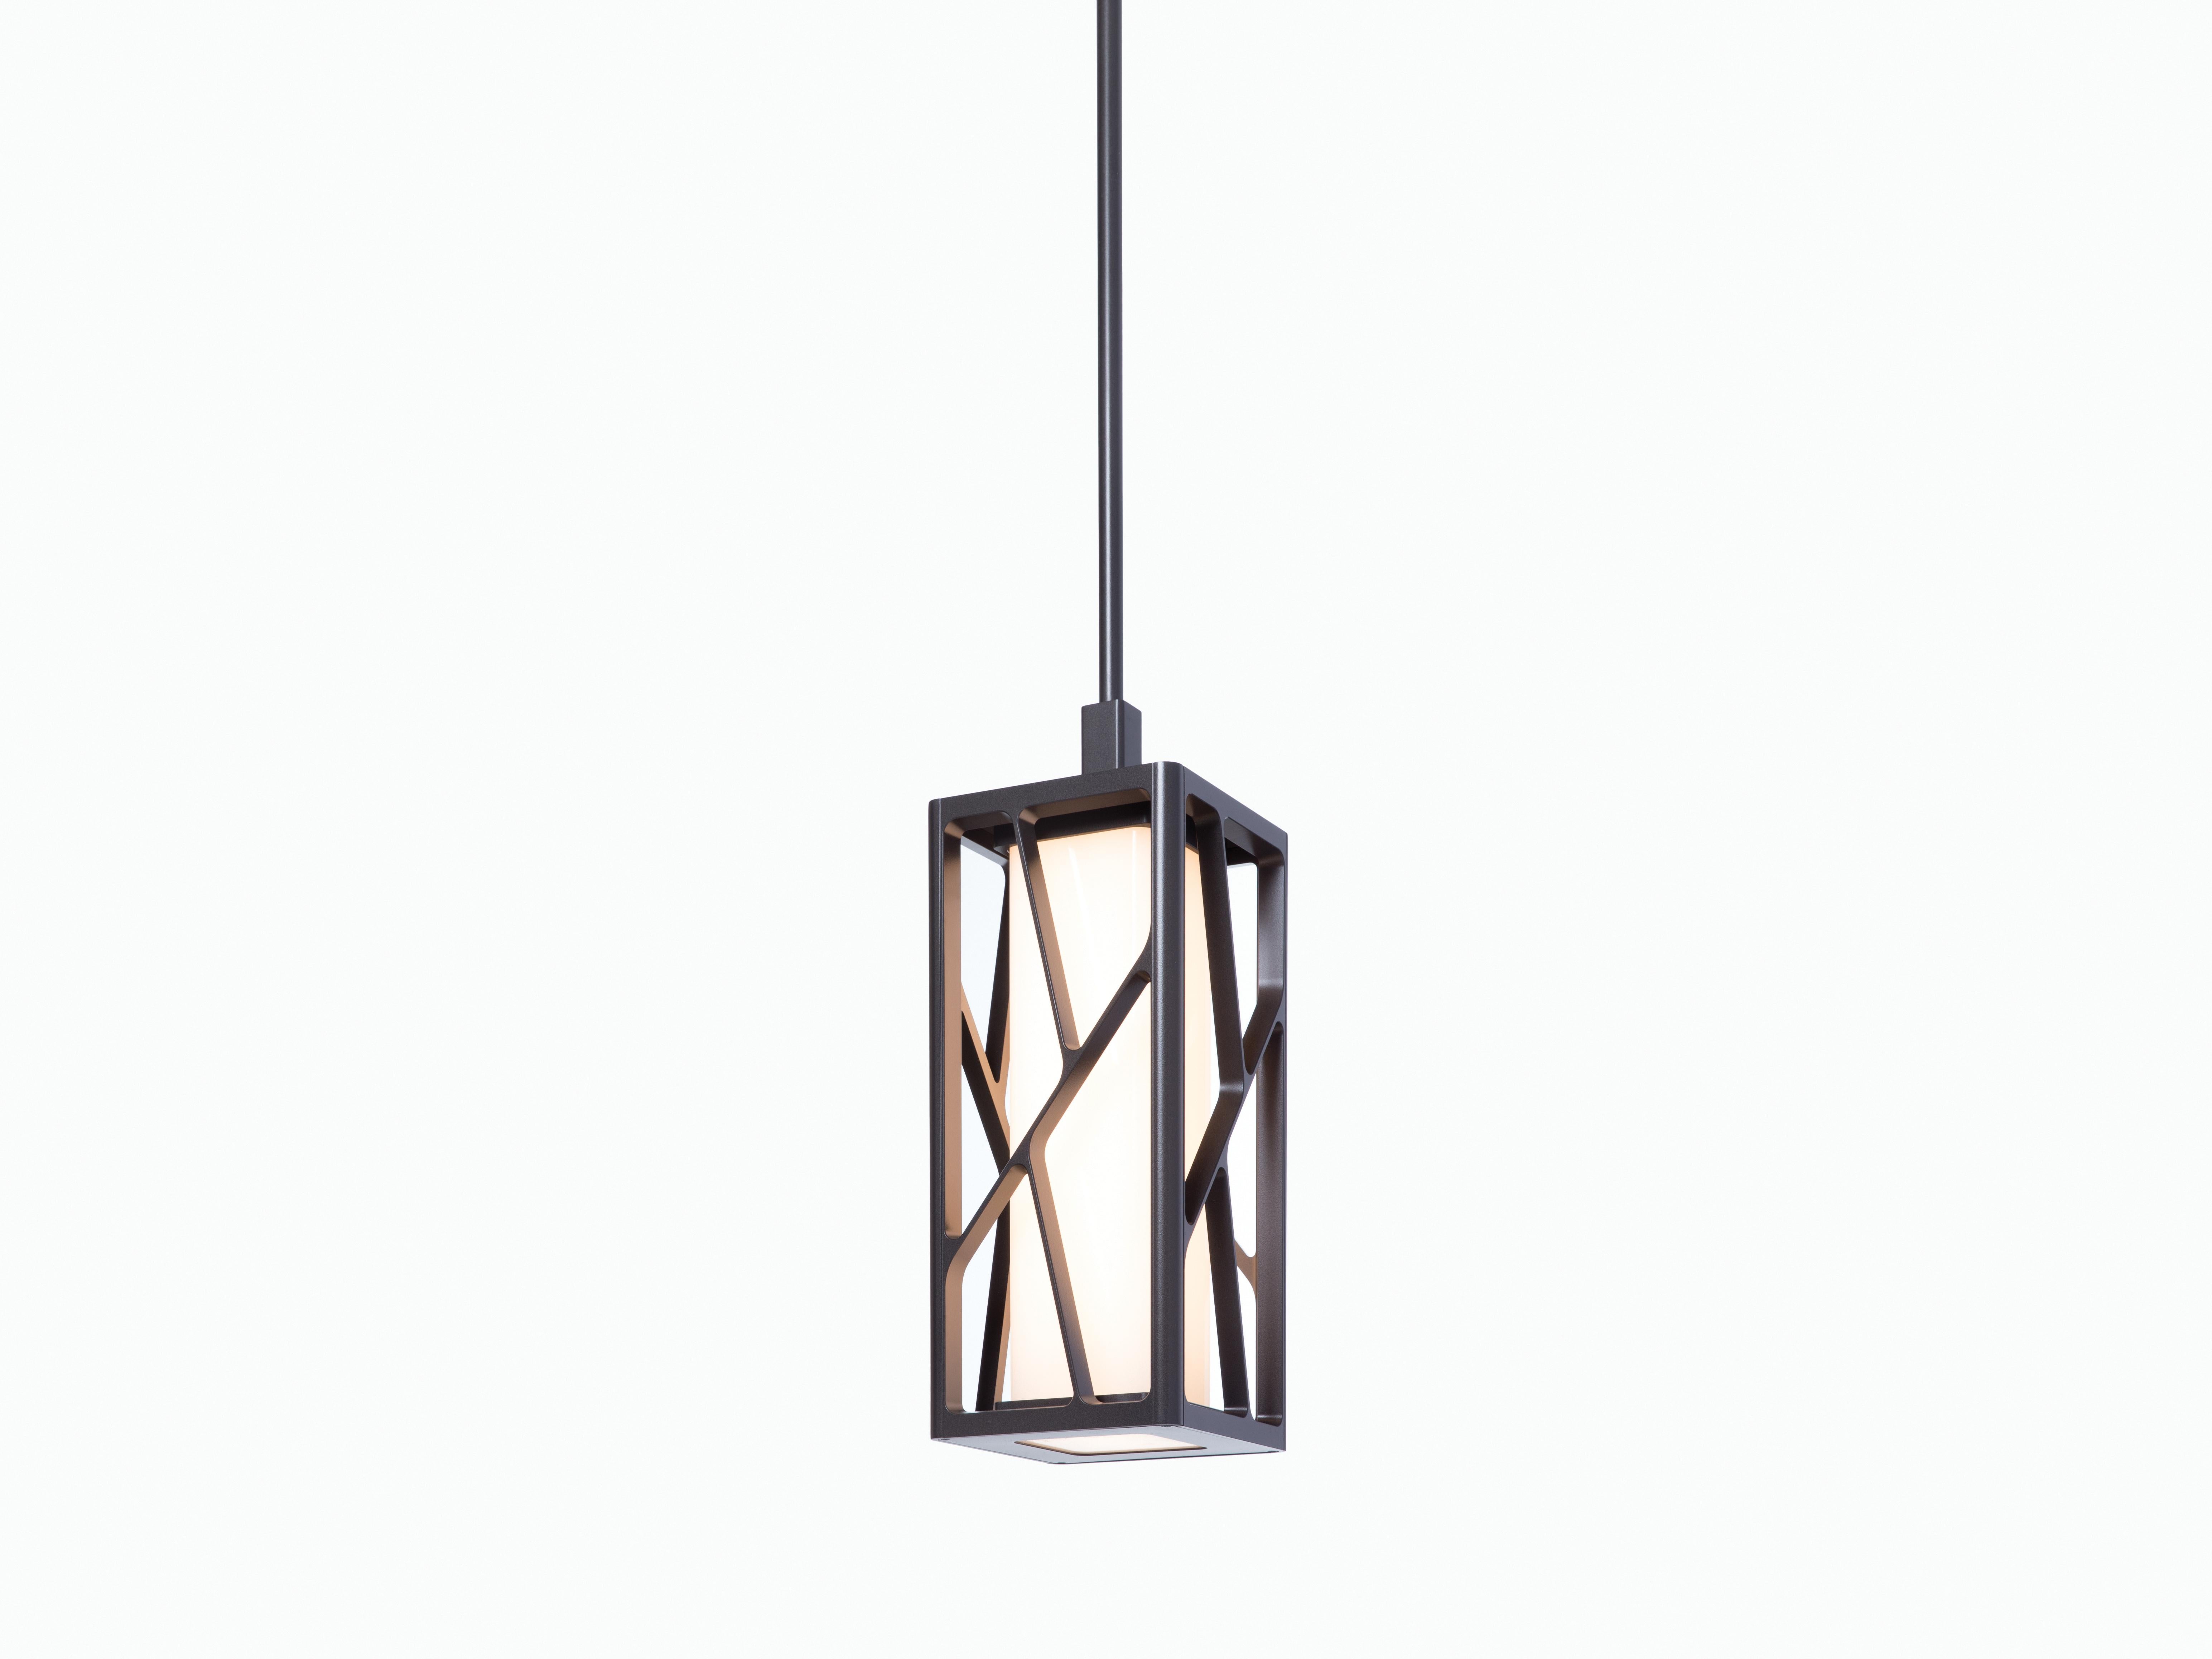 Echoing the geometric frame of our Reef dining table, this pendant is fully dimmable. Its generous scale is ideal for outdoors or grand interiors. The Reef Pendant can stand alone or in a series.

Additional Information:
Structure: Aluminum with